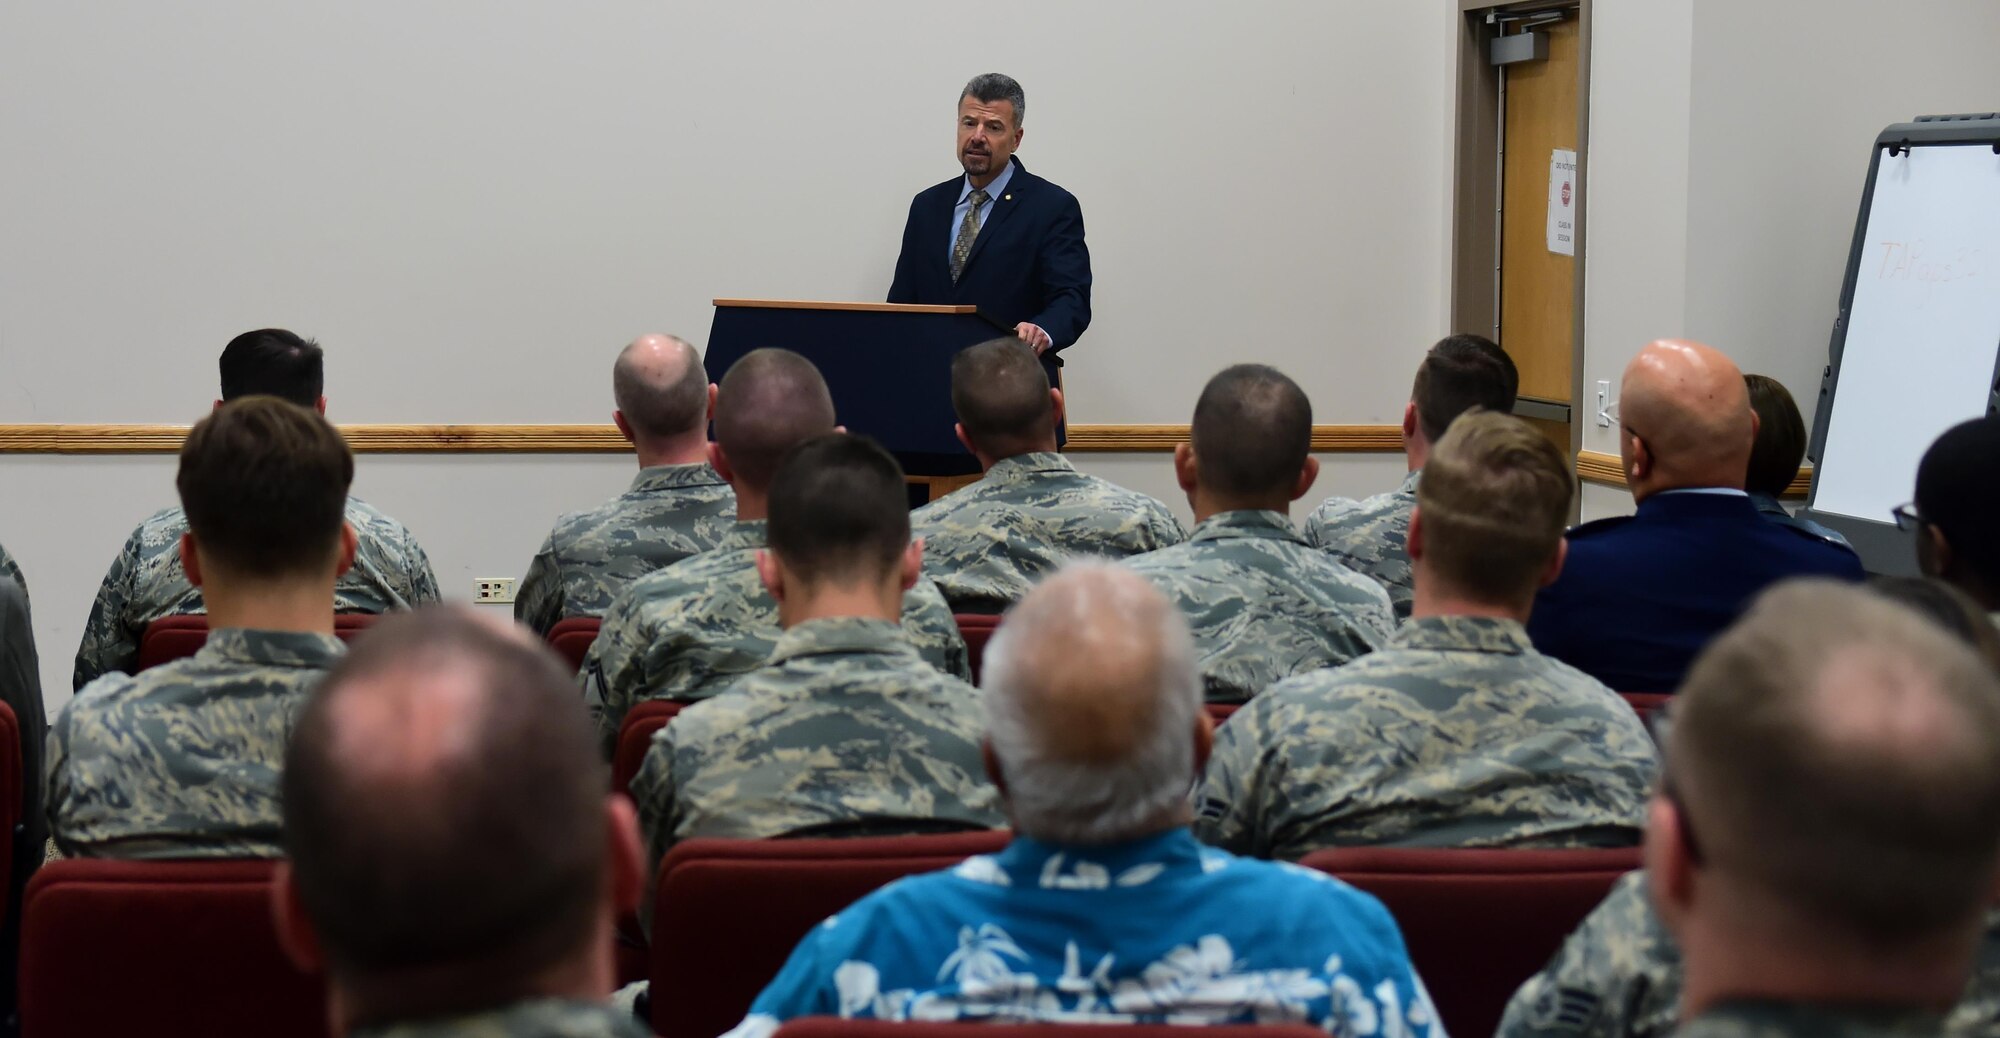 Chief Master Sgt. (ret.) Rene Simard speaks to members of Team Buckley Nov. 10, 2016, at Buckley Air Force Base, Colo. Simard, who previously served as the command chief of Buckley AFB, spoke to service members about both his military and life experiences for Veterans Day. (U.S. Air Force photo by Airman Holden S. Faul/ Released)